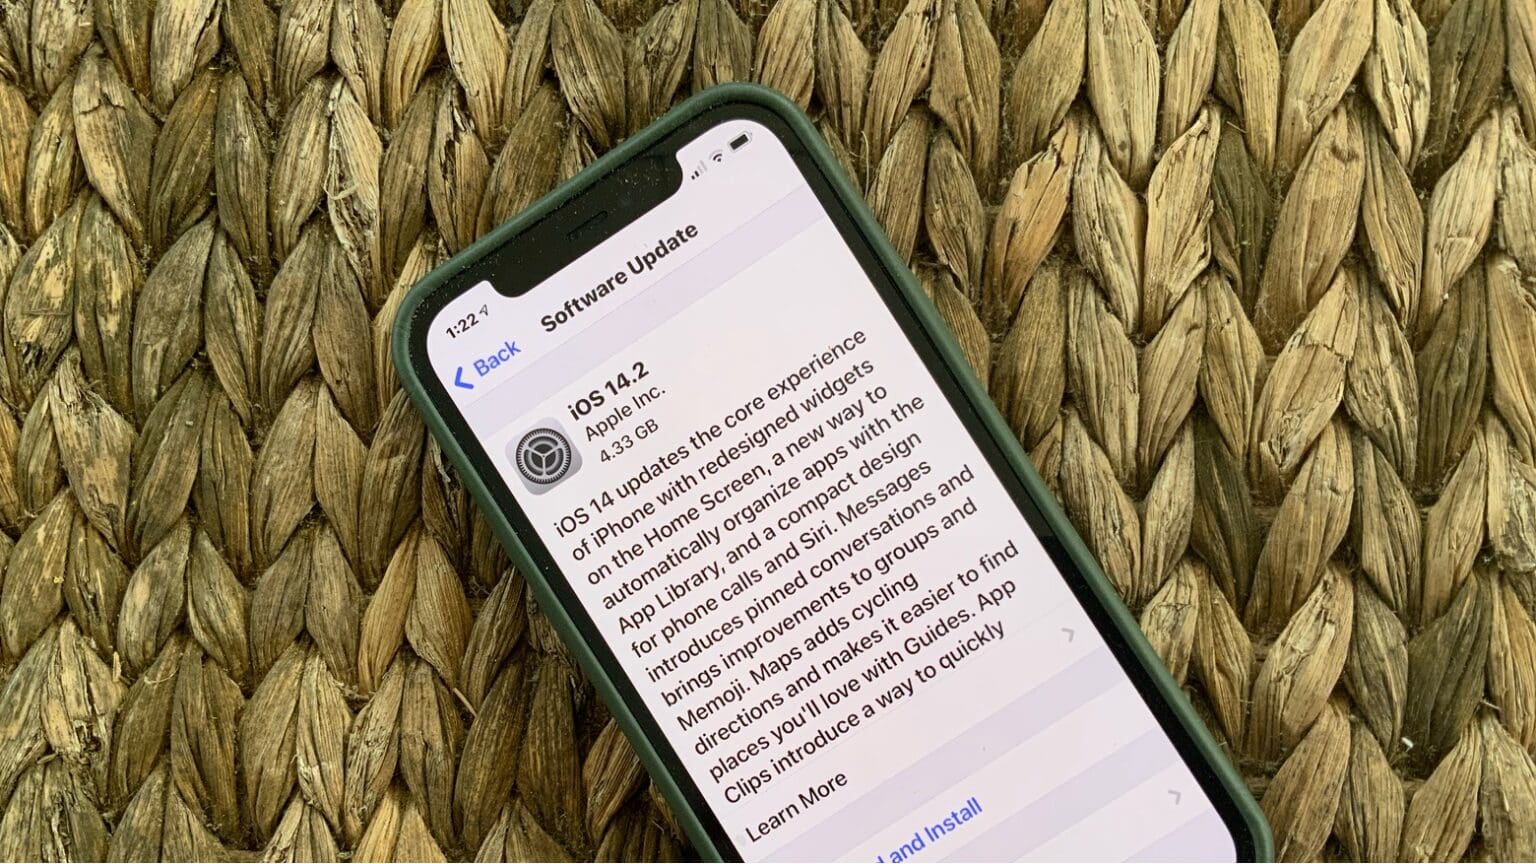 Final versions of iOS 14.2 and iPadOS 14.2 were released to the general public on Nov. 5.